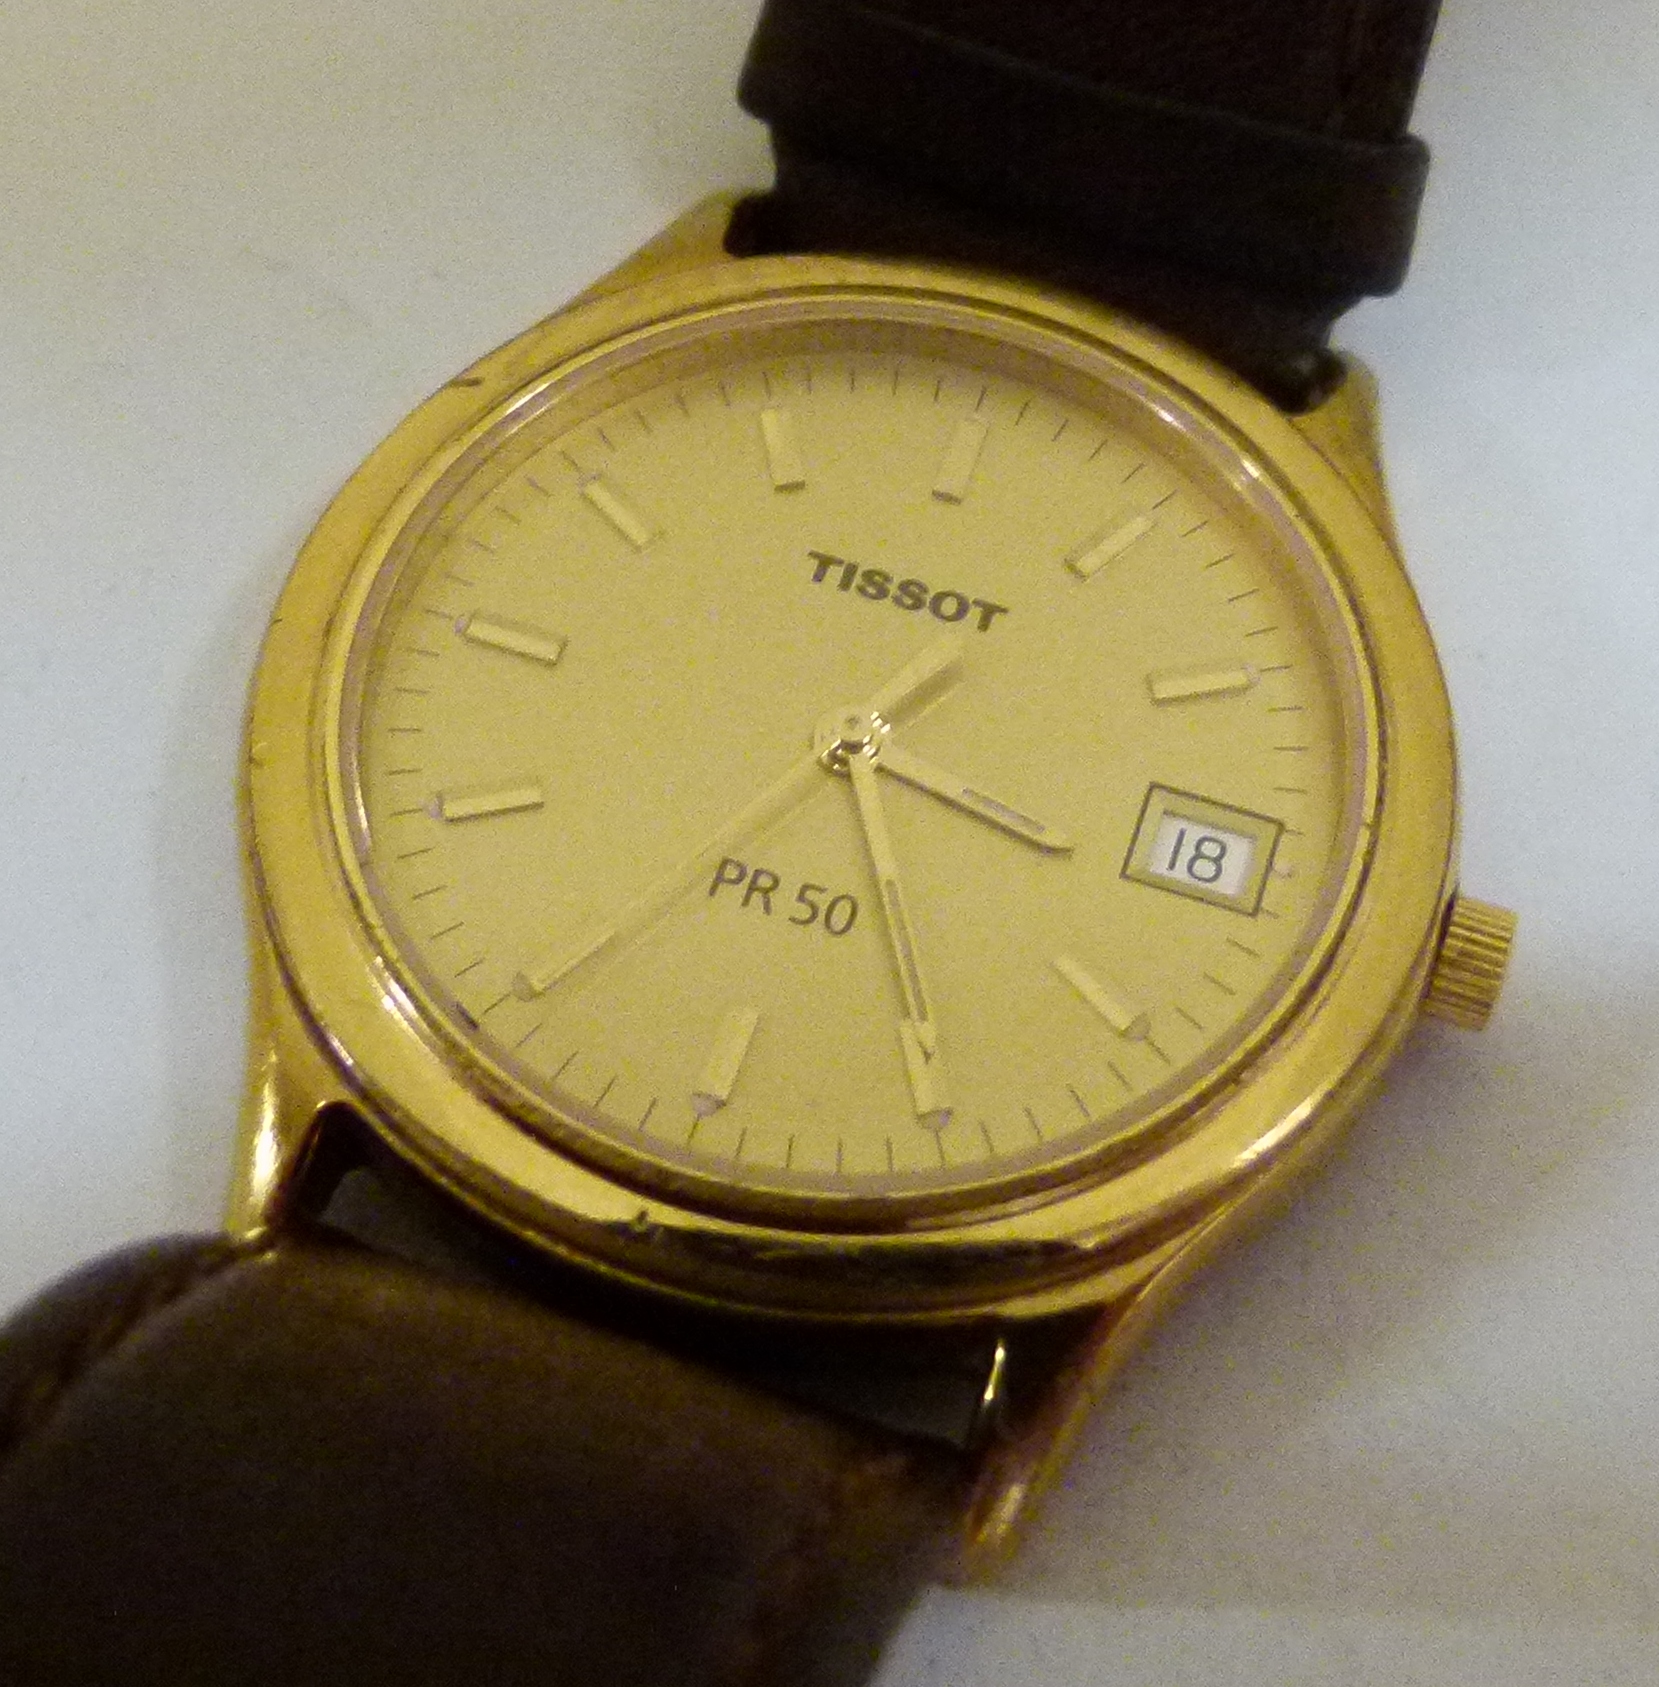 Gents Tissot gold plated watch on a leather strap,